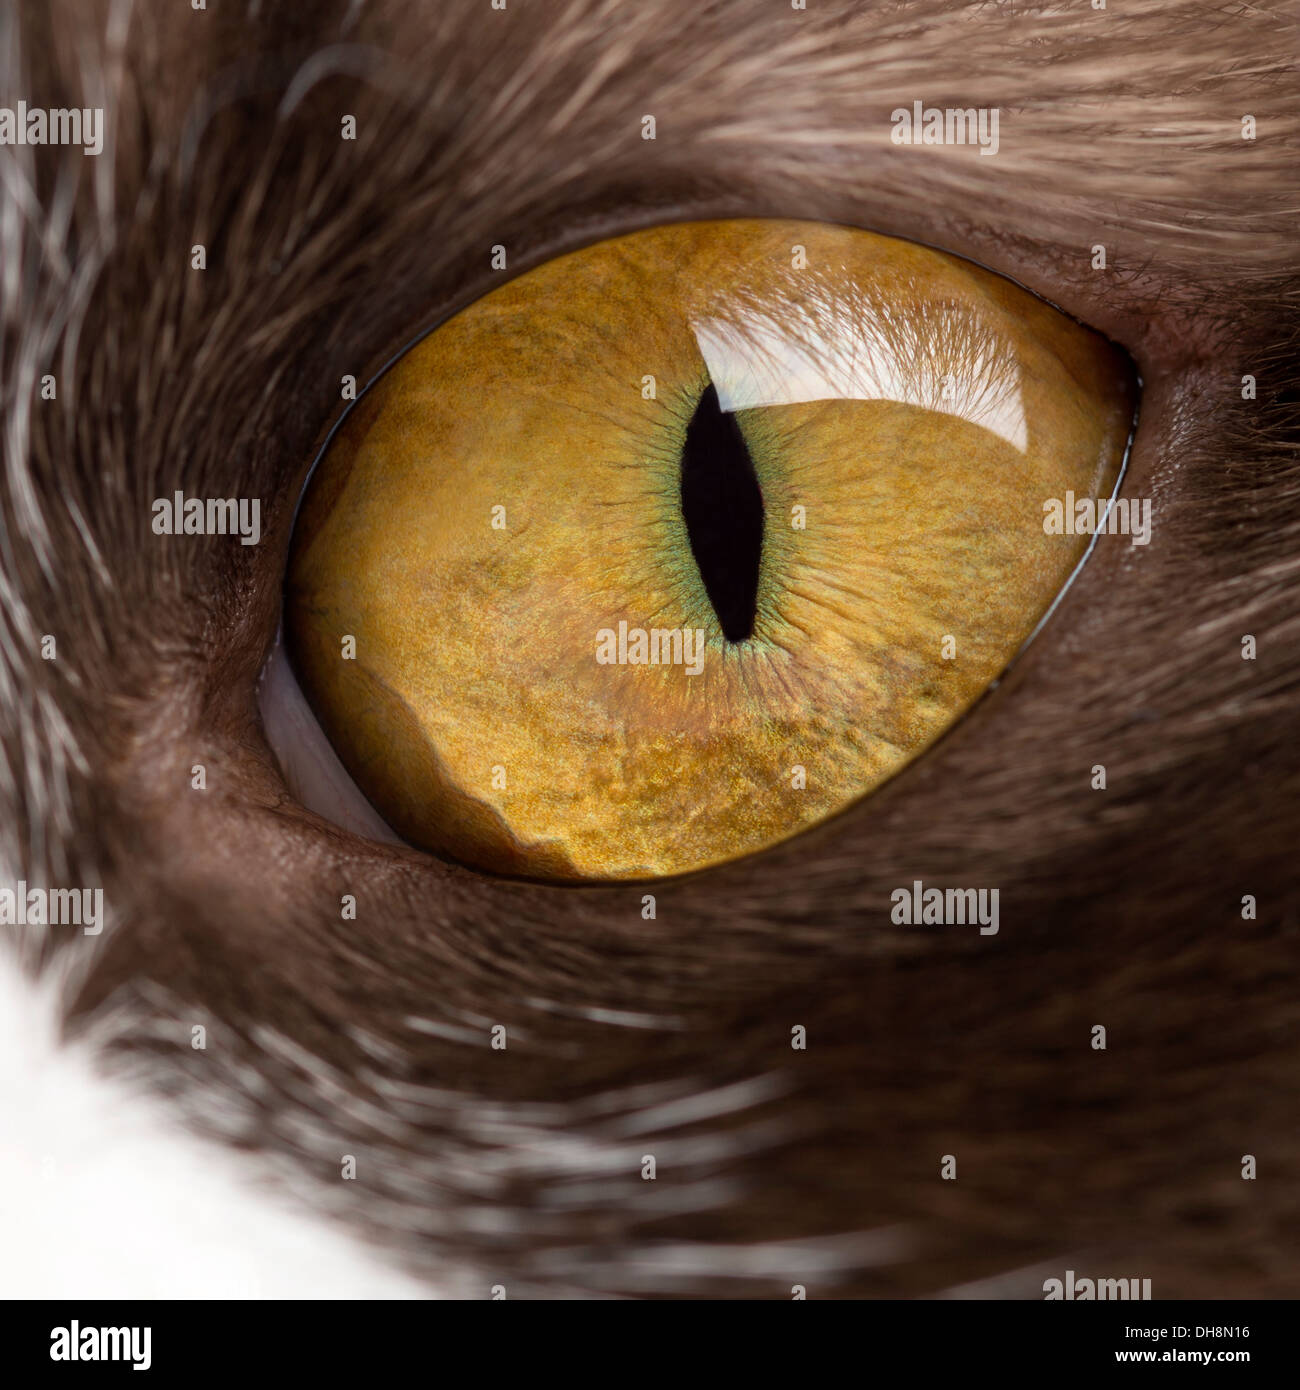 Close-up of a British Longhair's eye Stock Photo